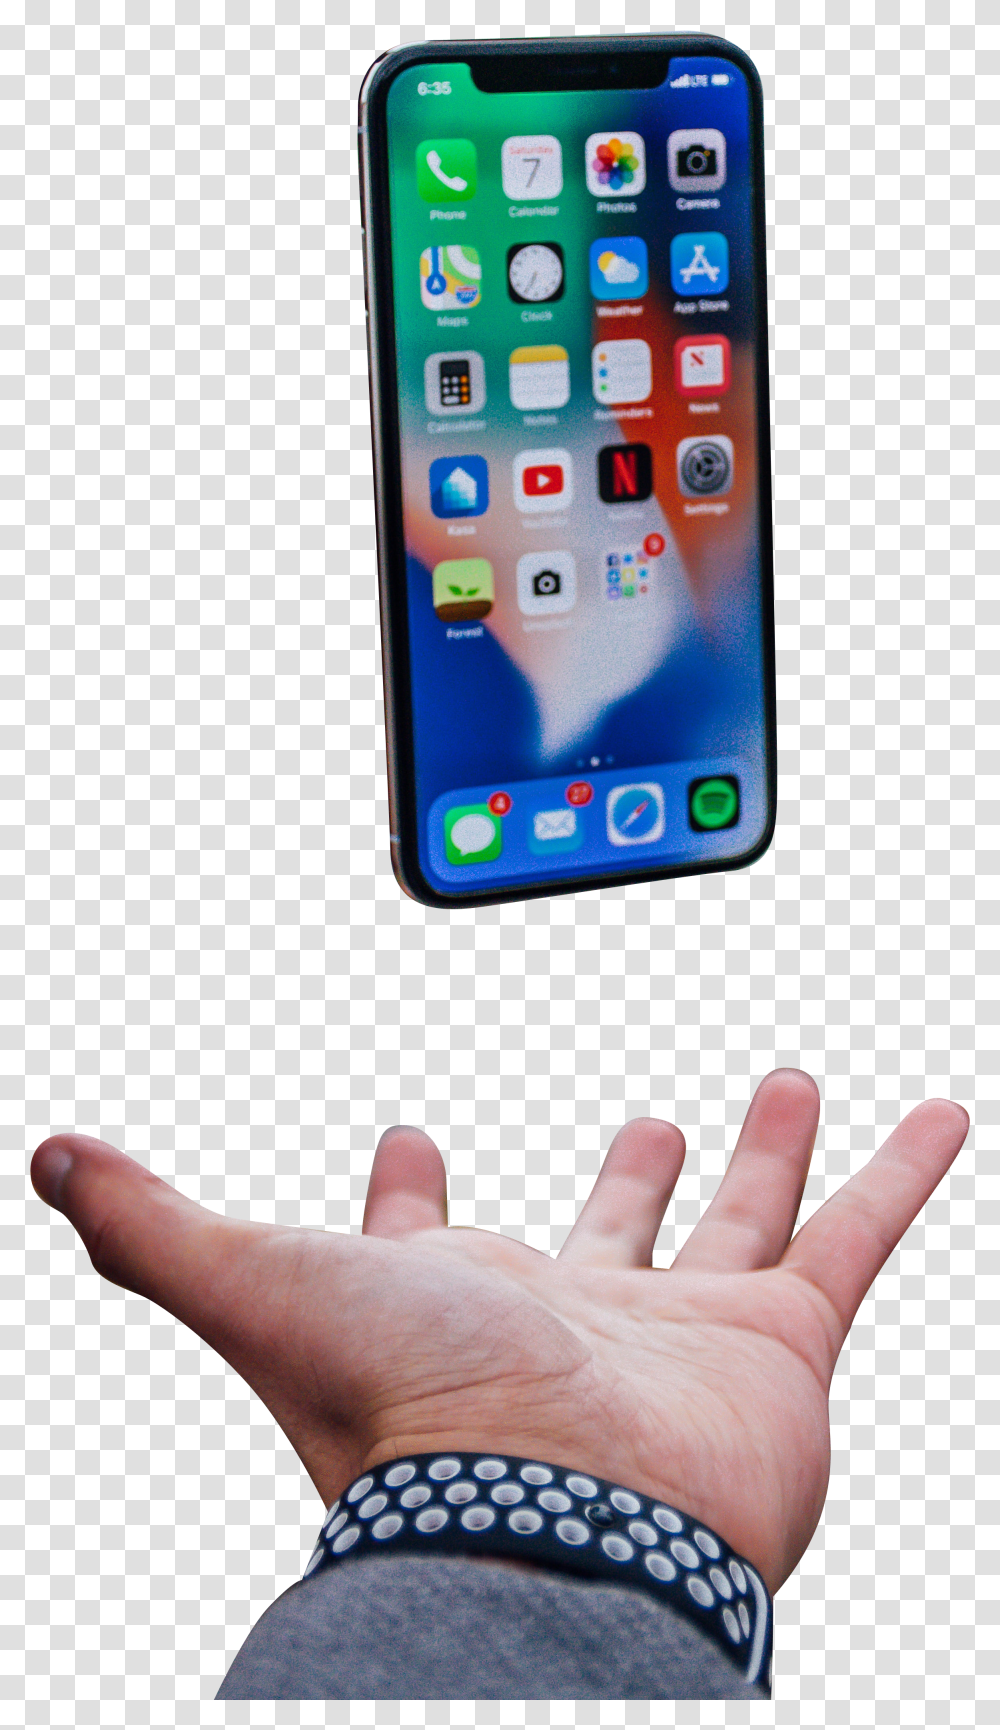 Iphone X Floating Over Palm Background Phone Floating Over A Hand Transparent Png